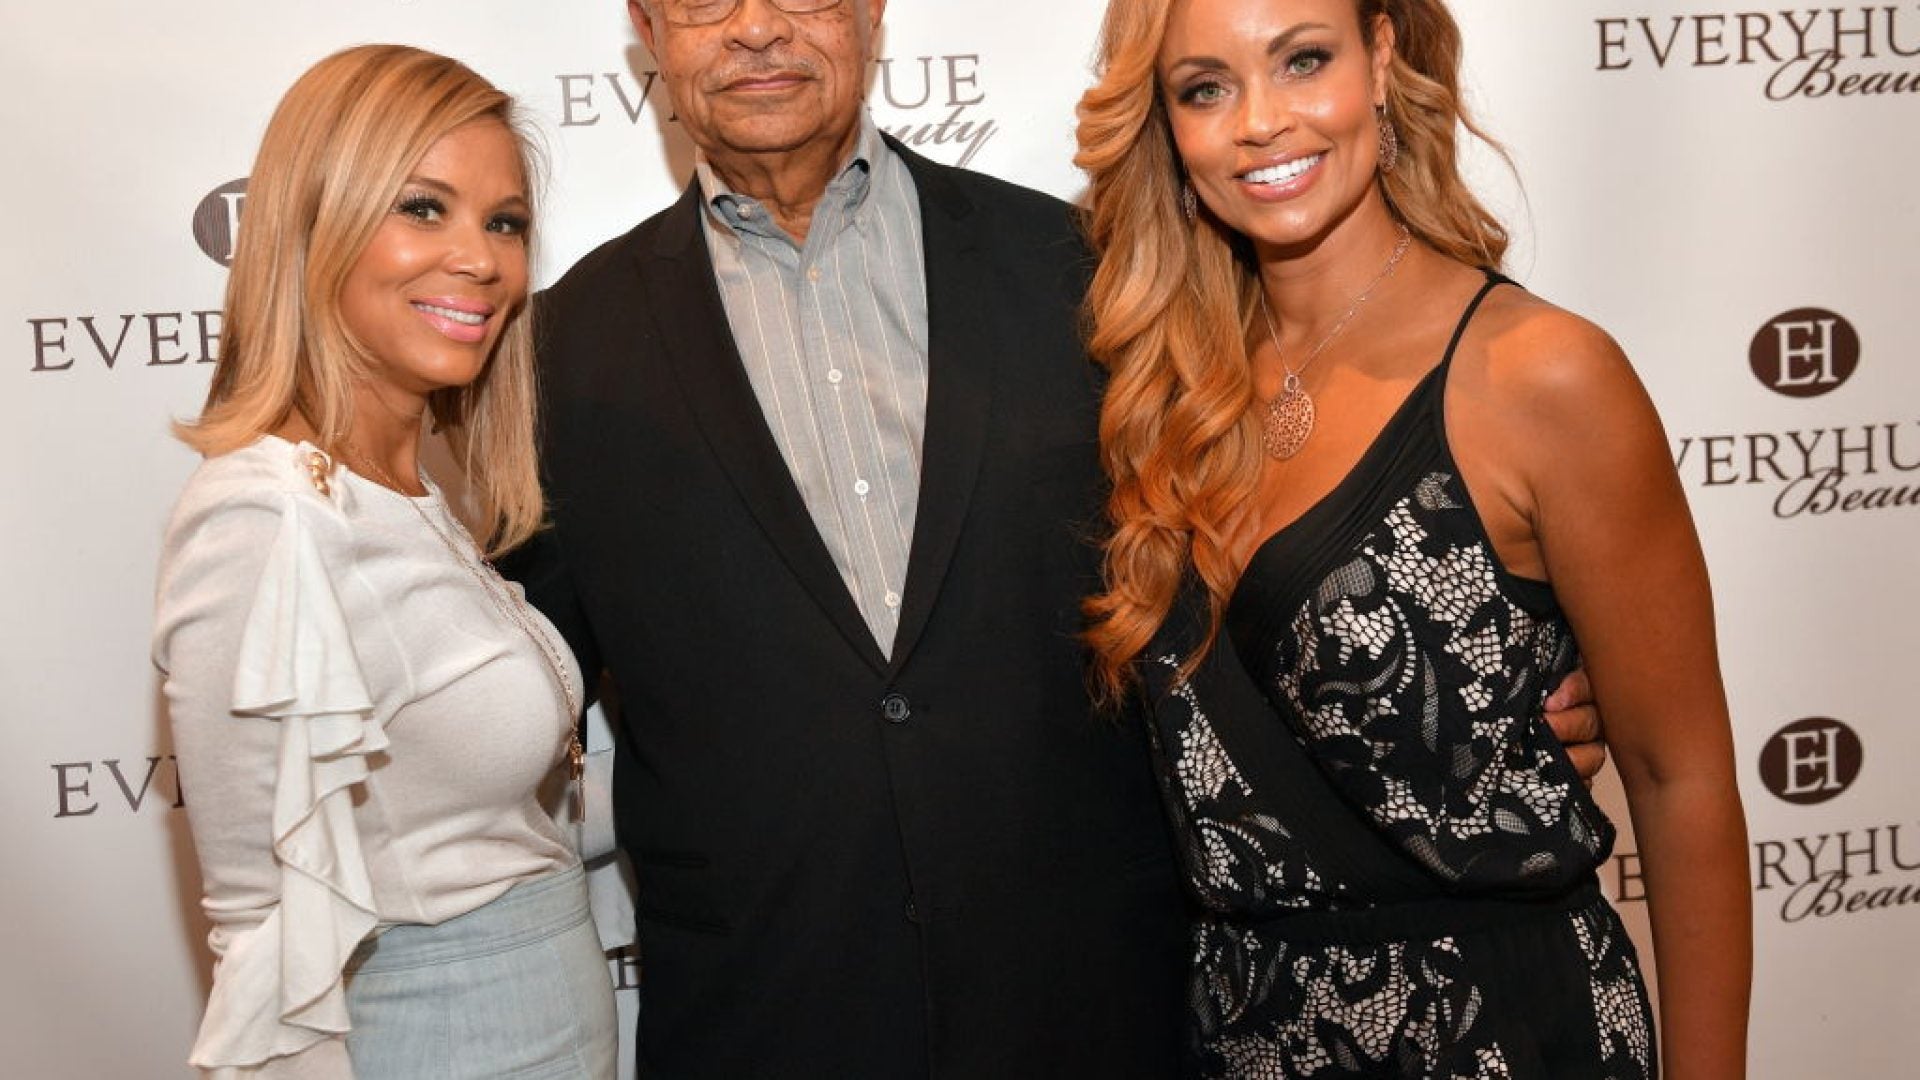 Curtis Graves, Civil Rights Activist And Dad To “RHOP” Star Gizelle Bryant, Has Passed Away